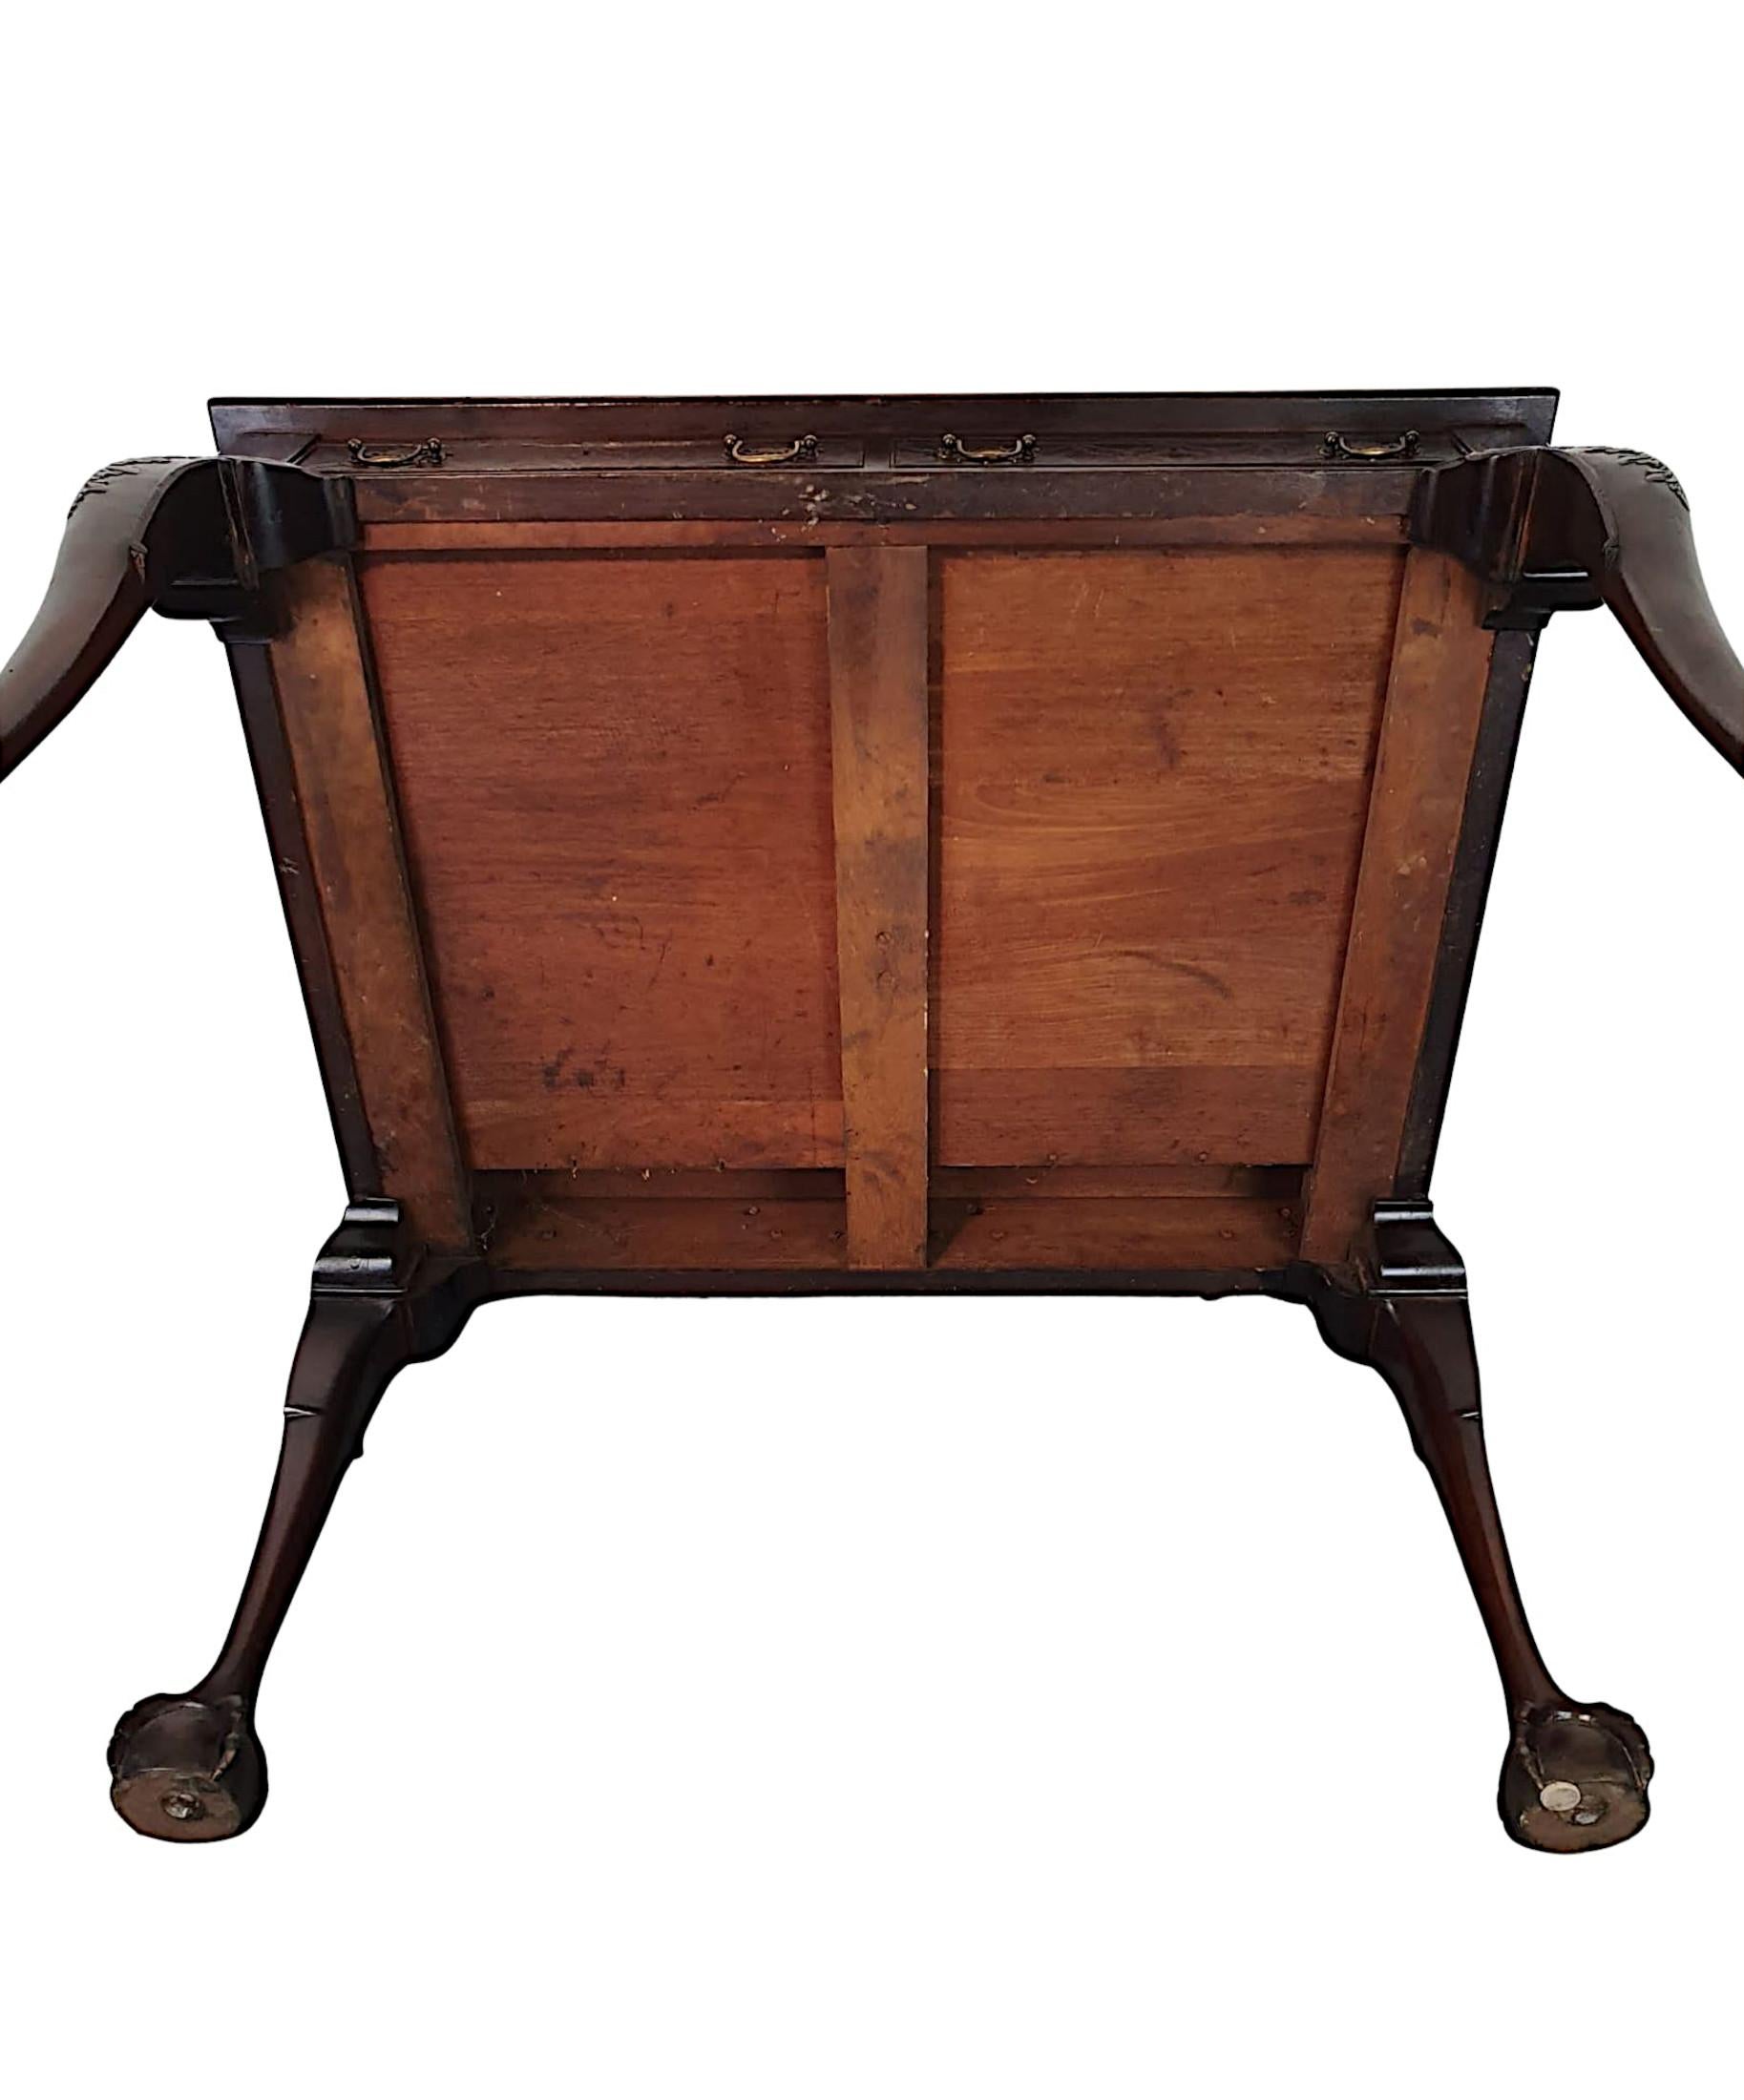 Stunning Late 19th Century Desk in the Thomas Chippendale Manner For Sale 2